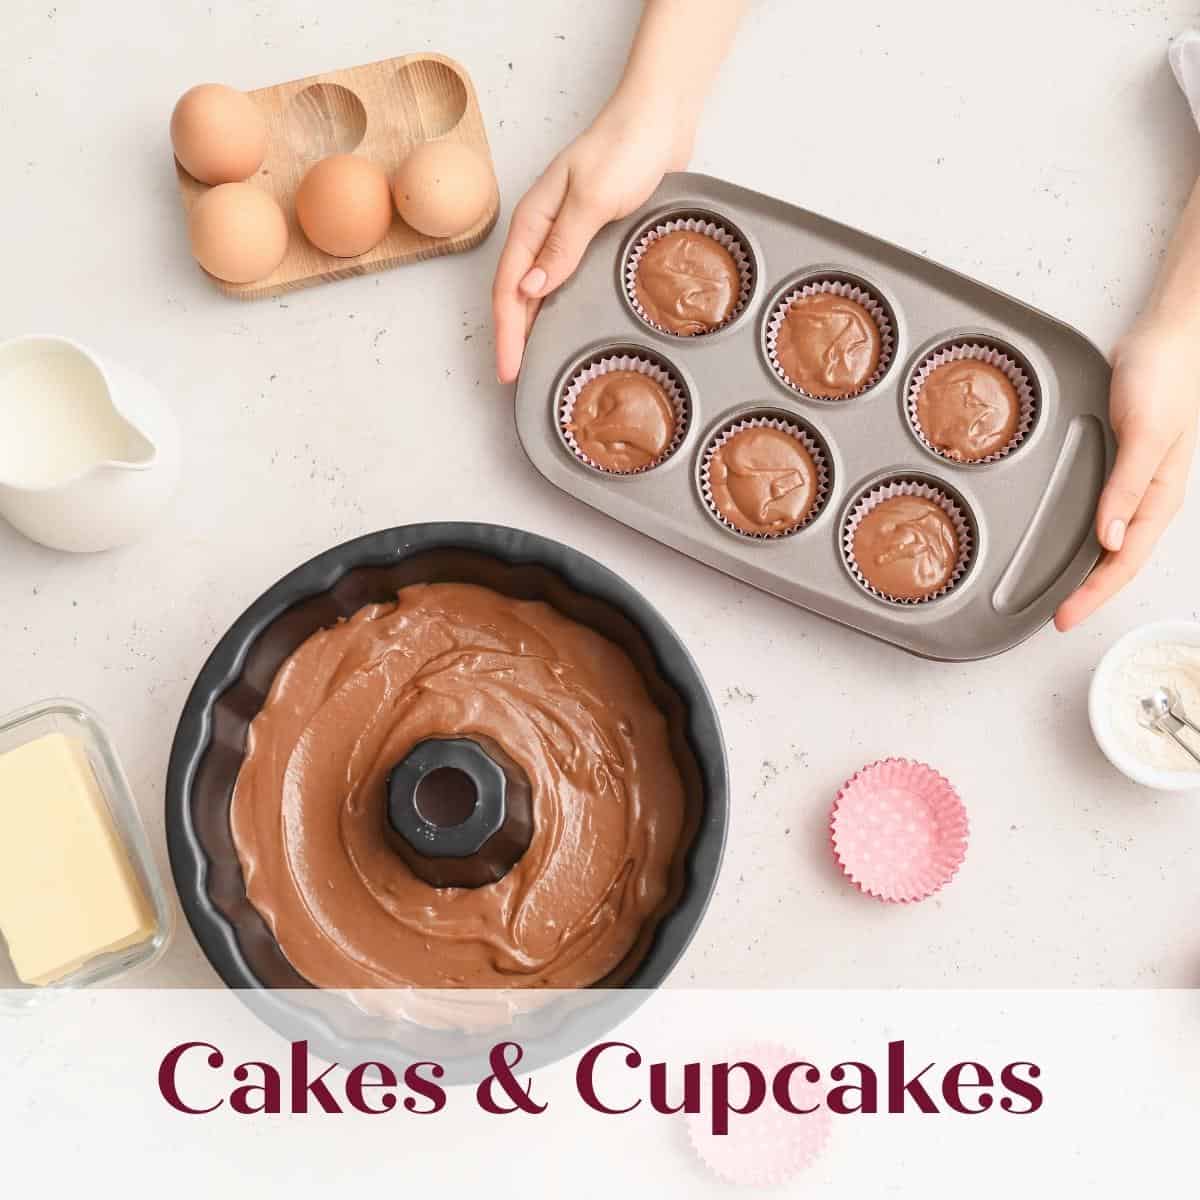 Cakes and cupcakes category graphic with cake batter in pans.